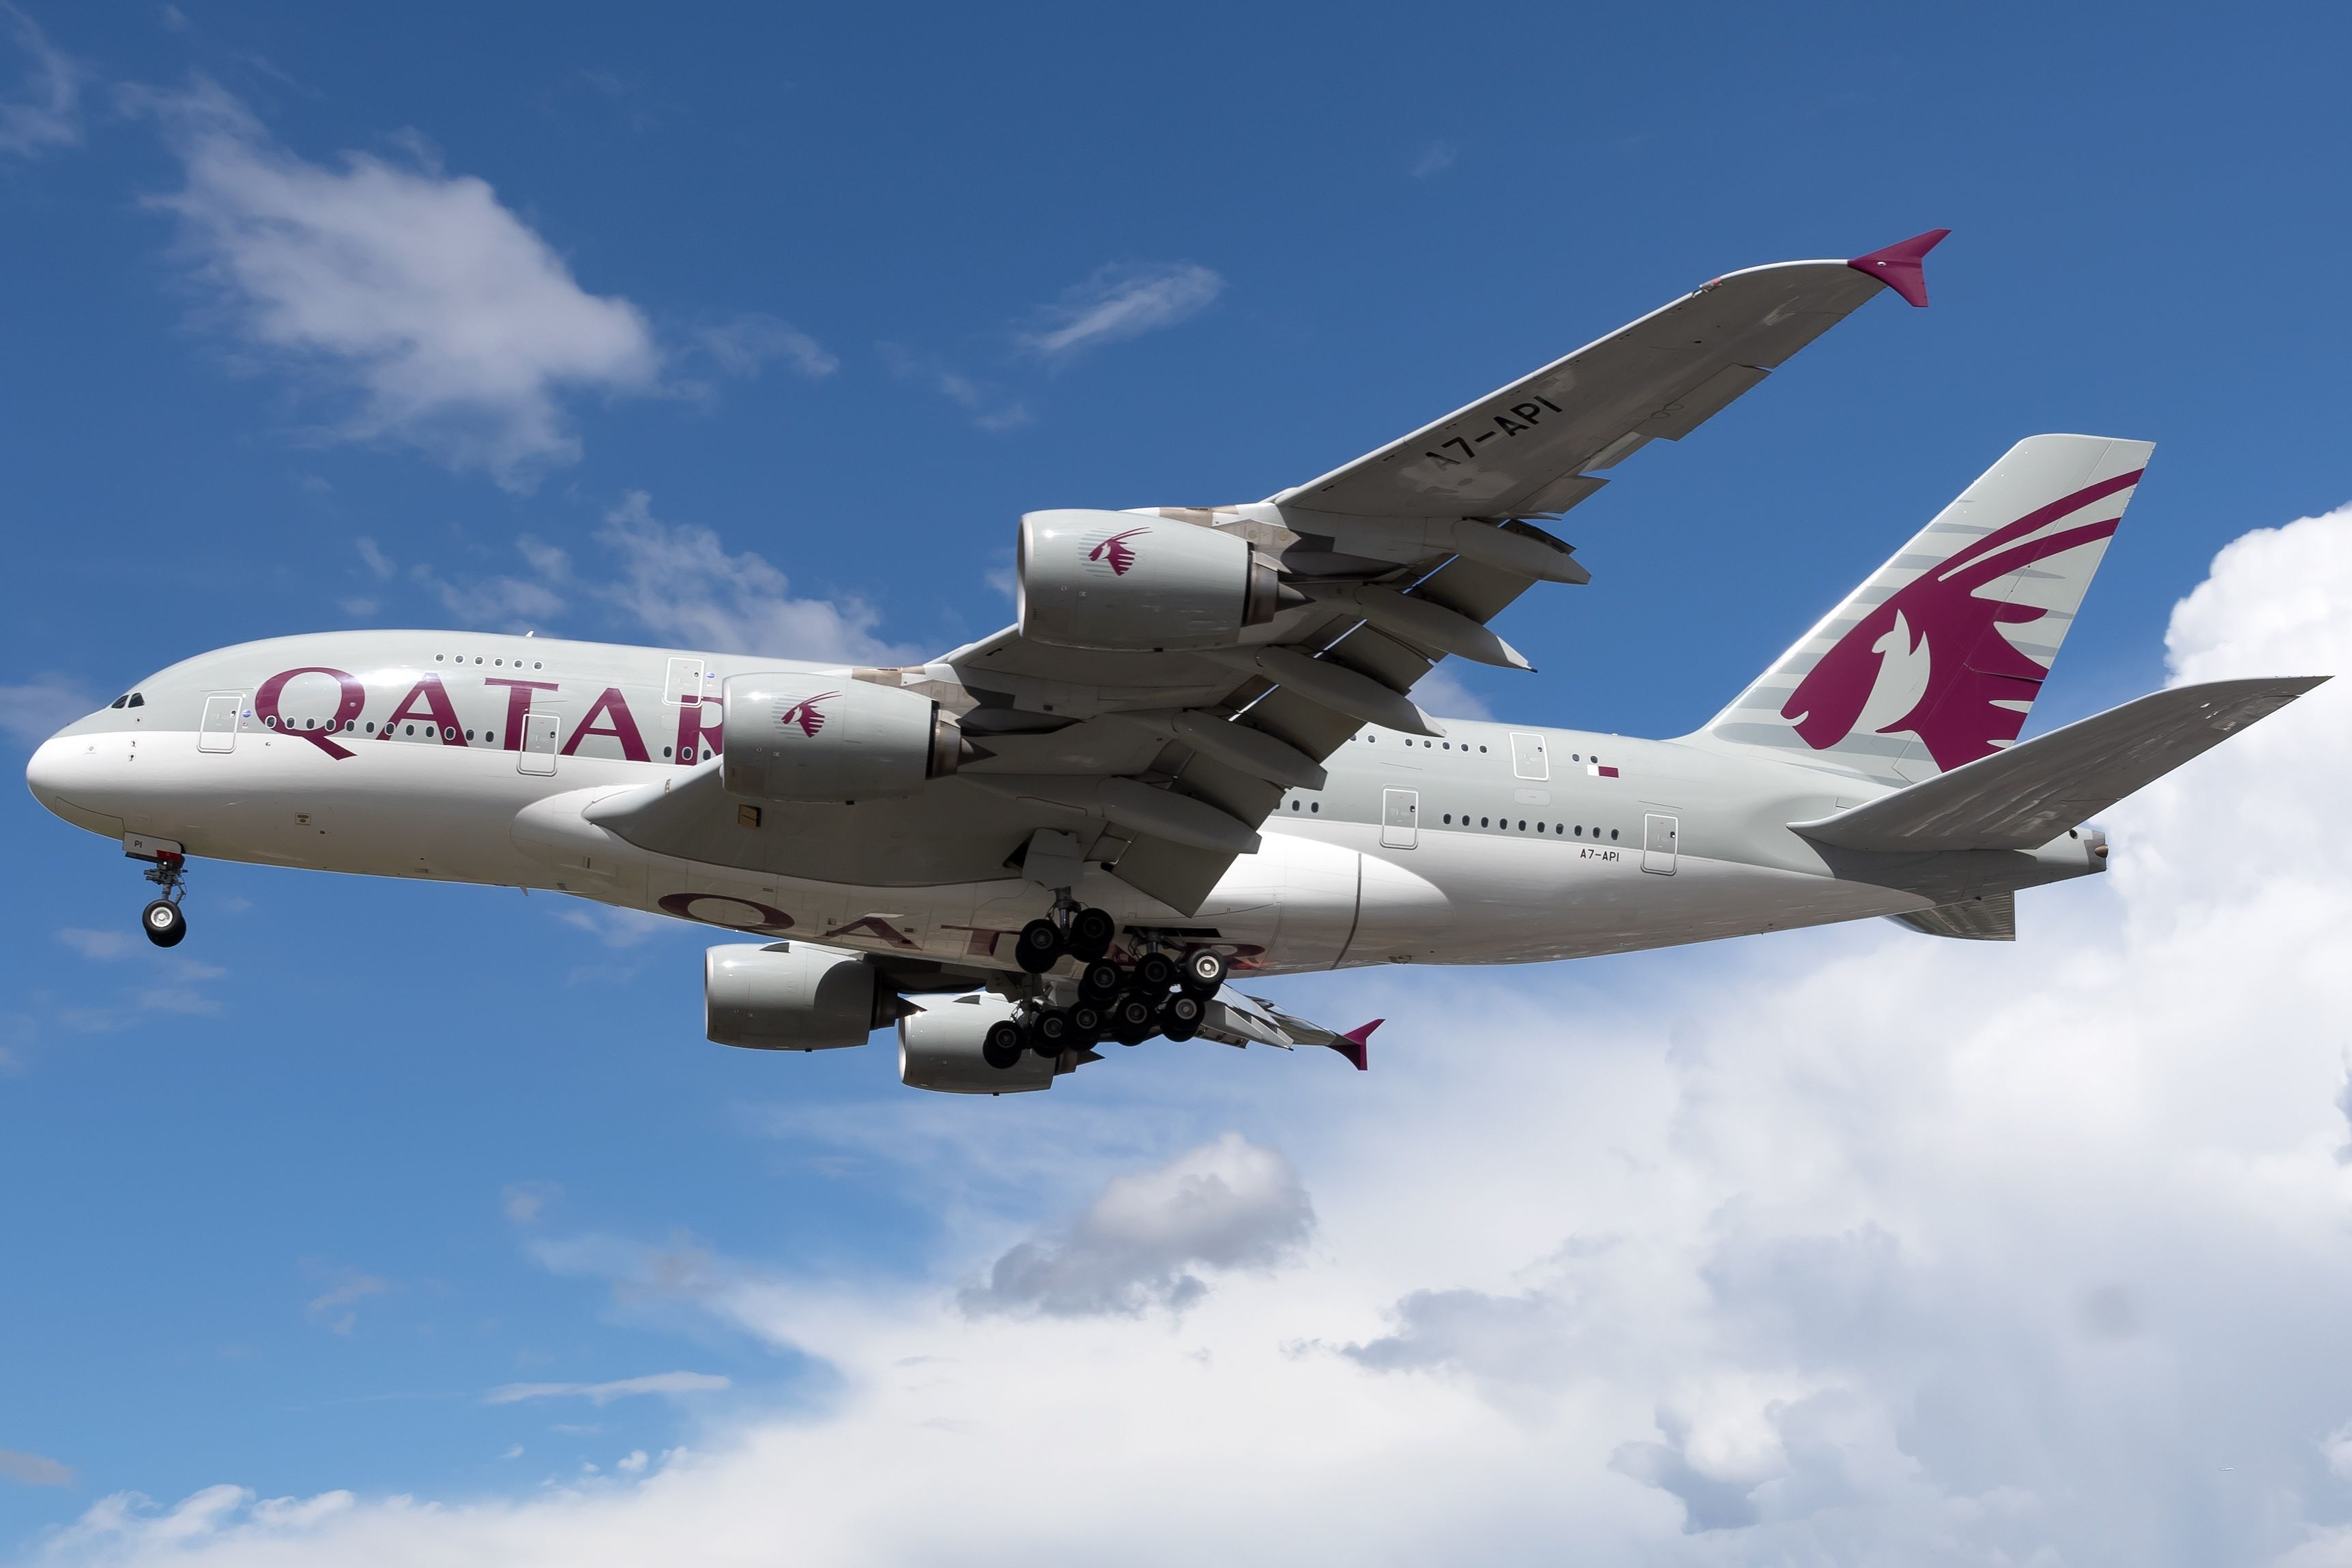 White Airbus A380 jetliner with Qatar in purple lettering on the side flying in blue sky and clouds